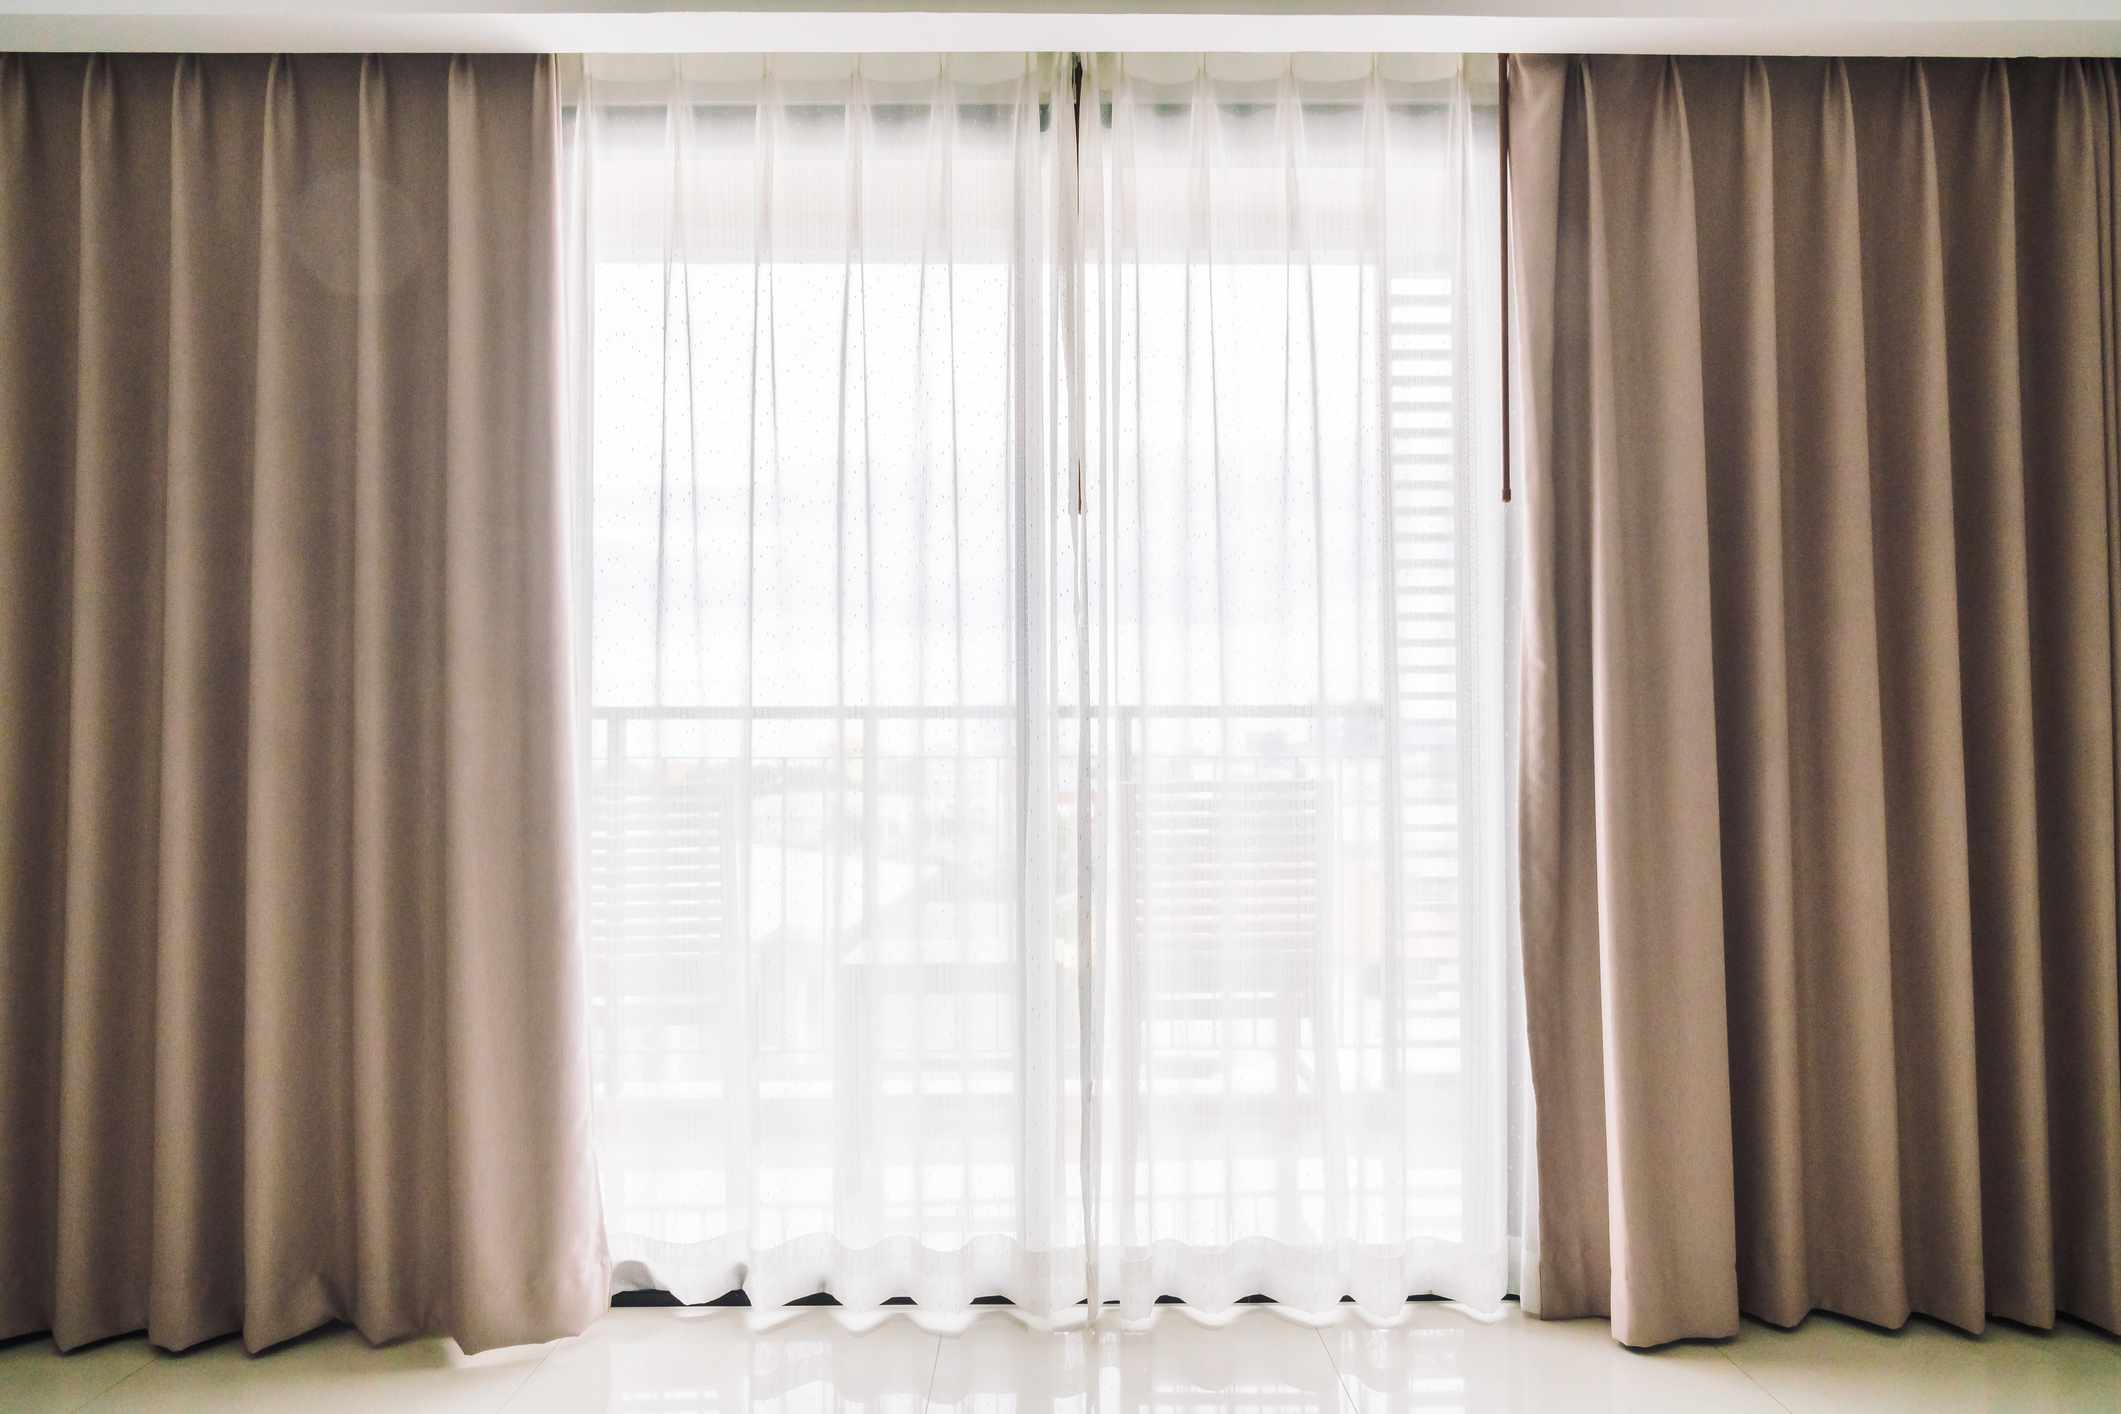 How long will curtains last?